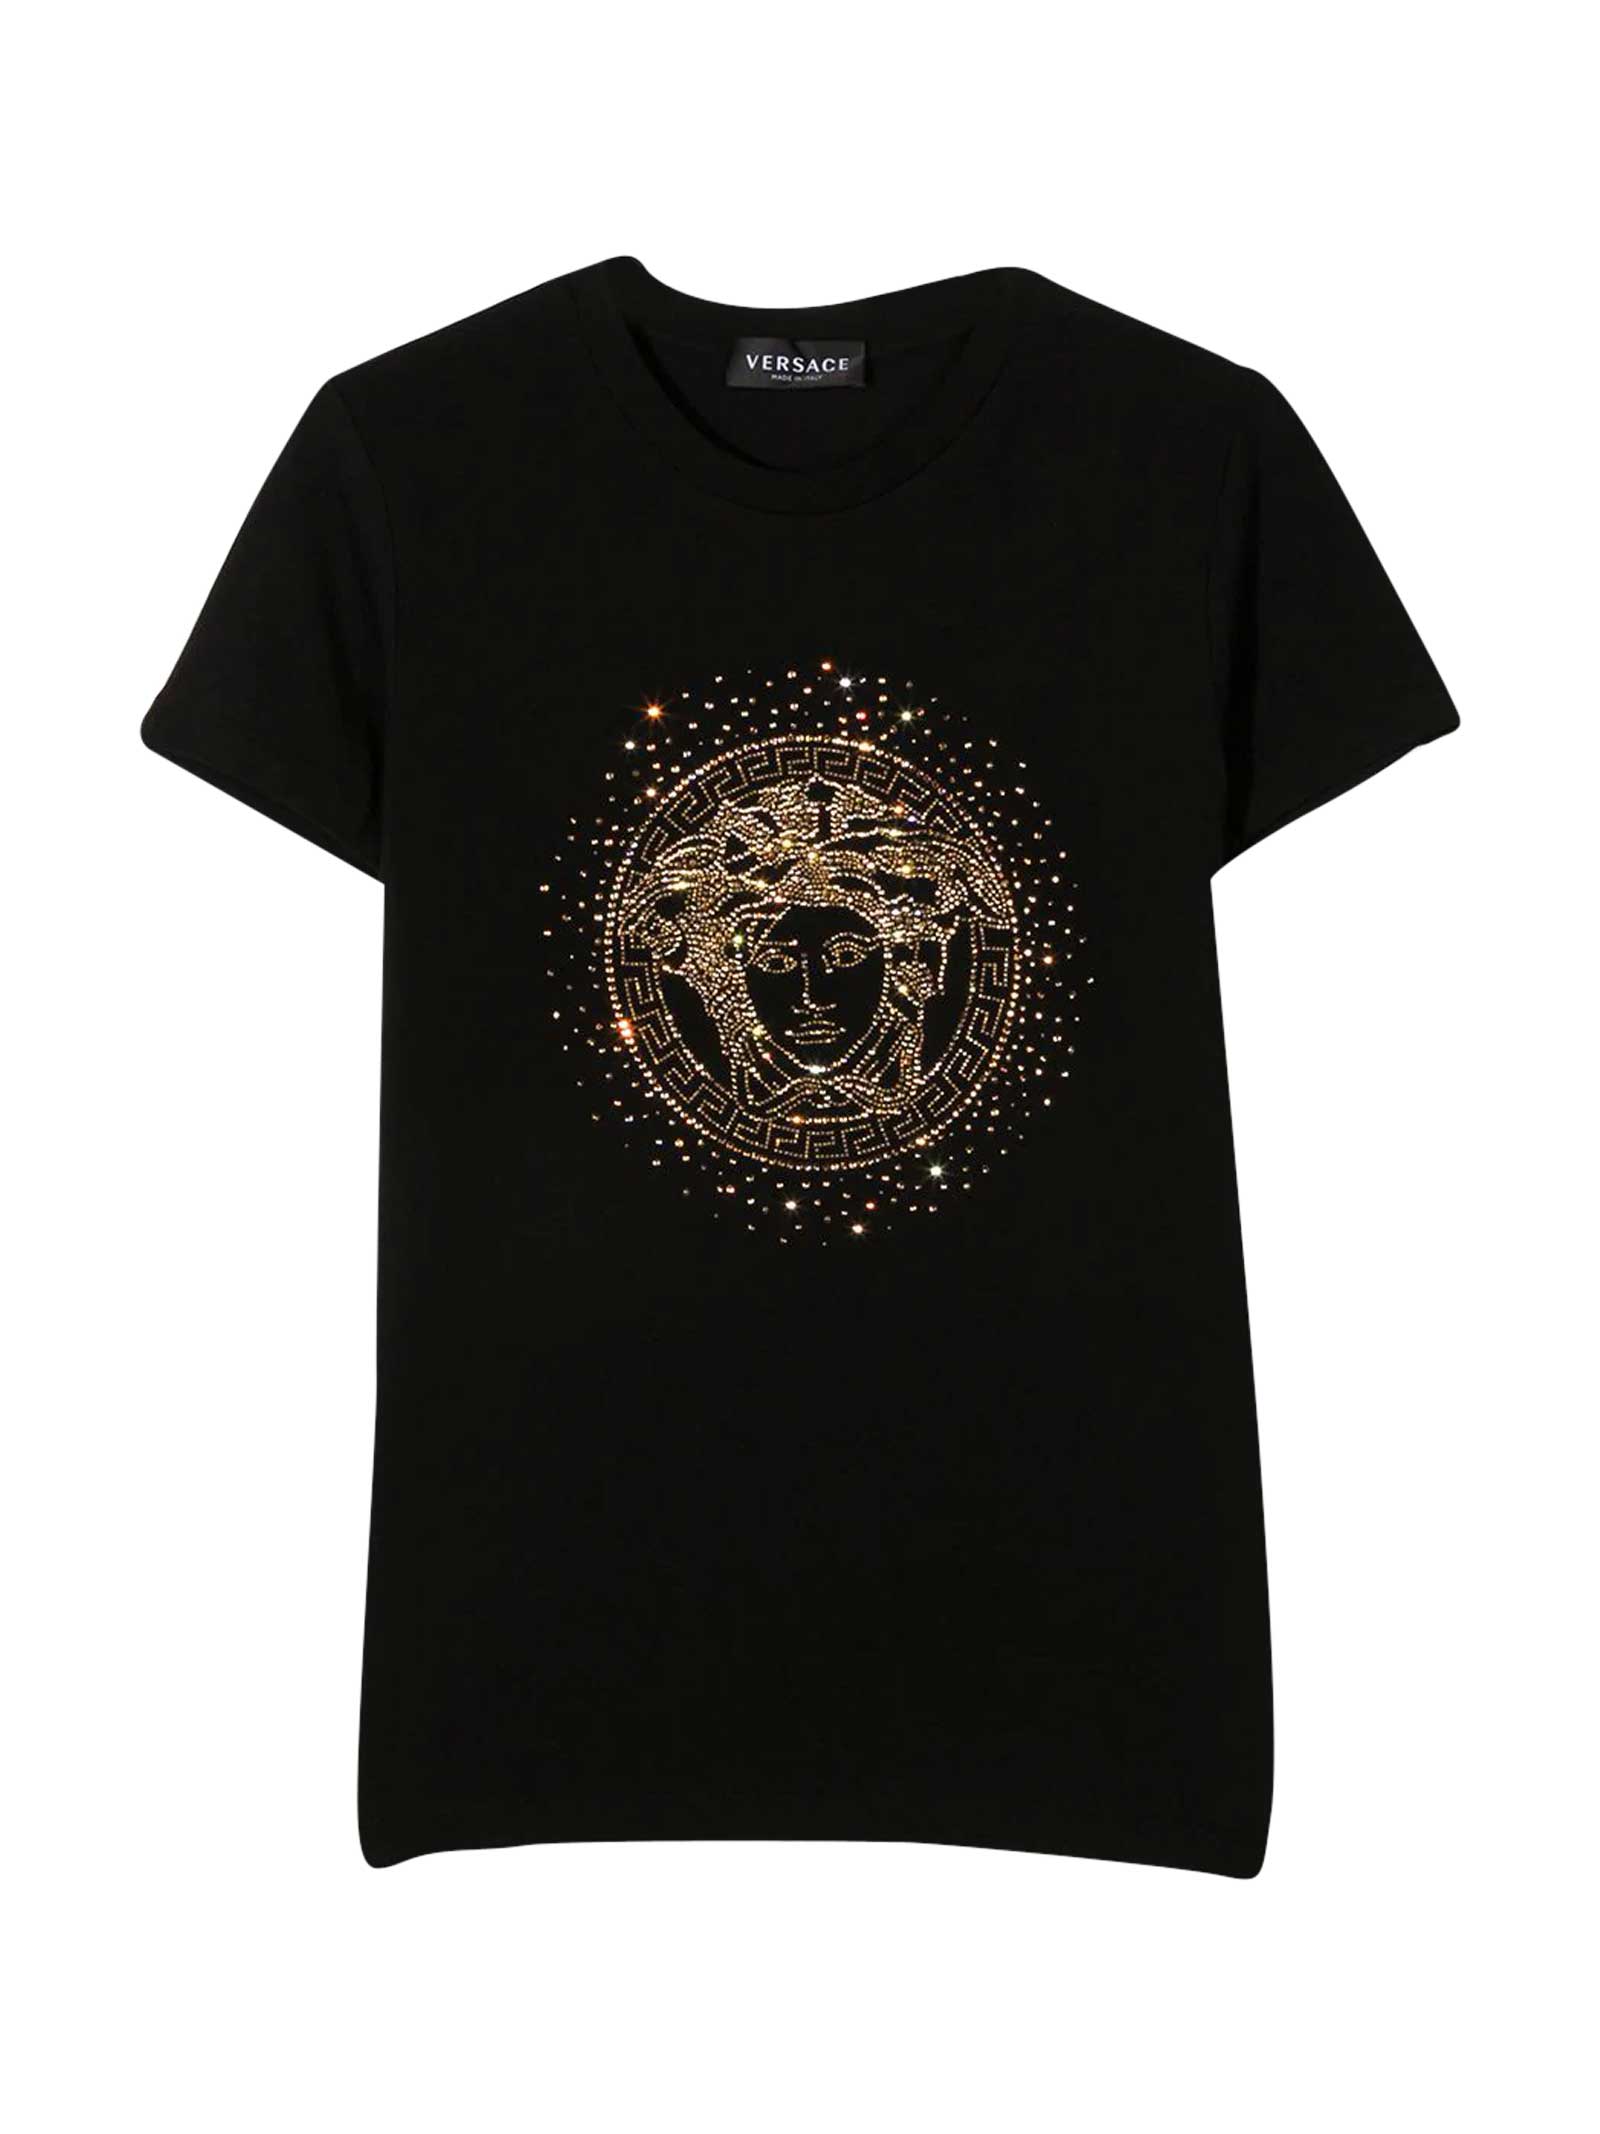 Versace Black T-shirt With Golden Print Young